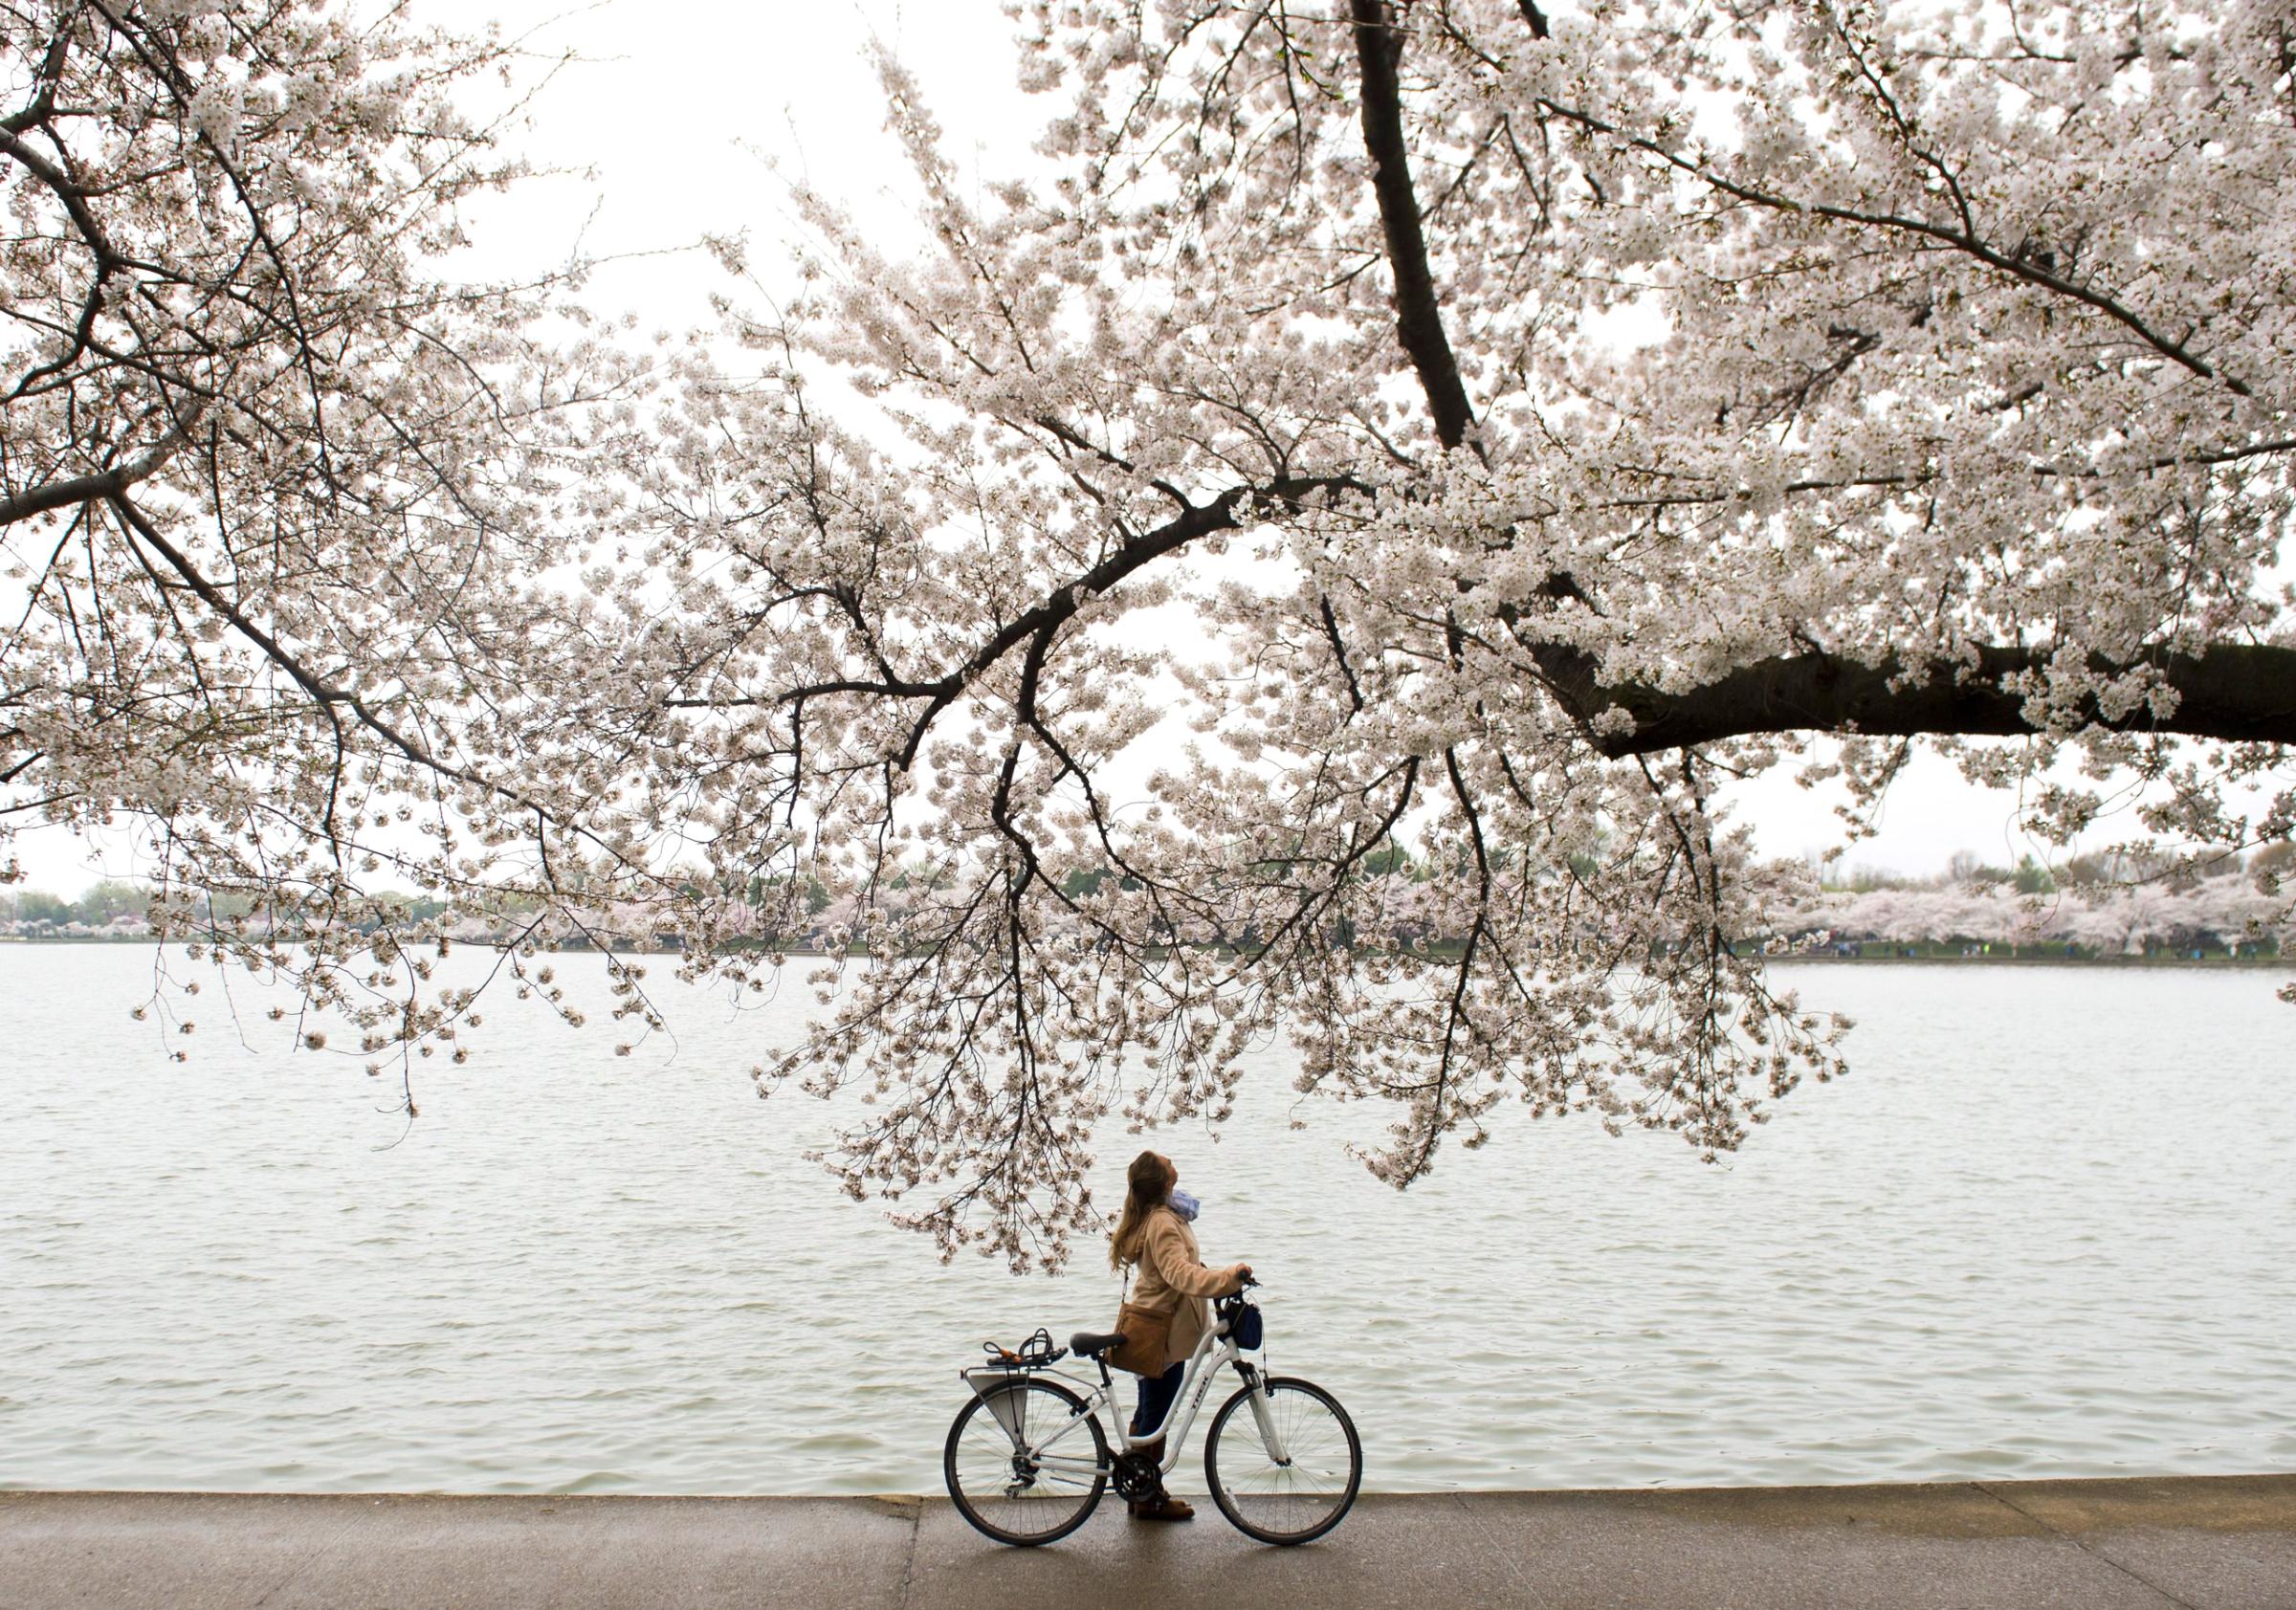 The Best Cities to Bike In - Washington, D.C.